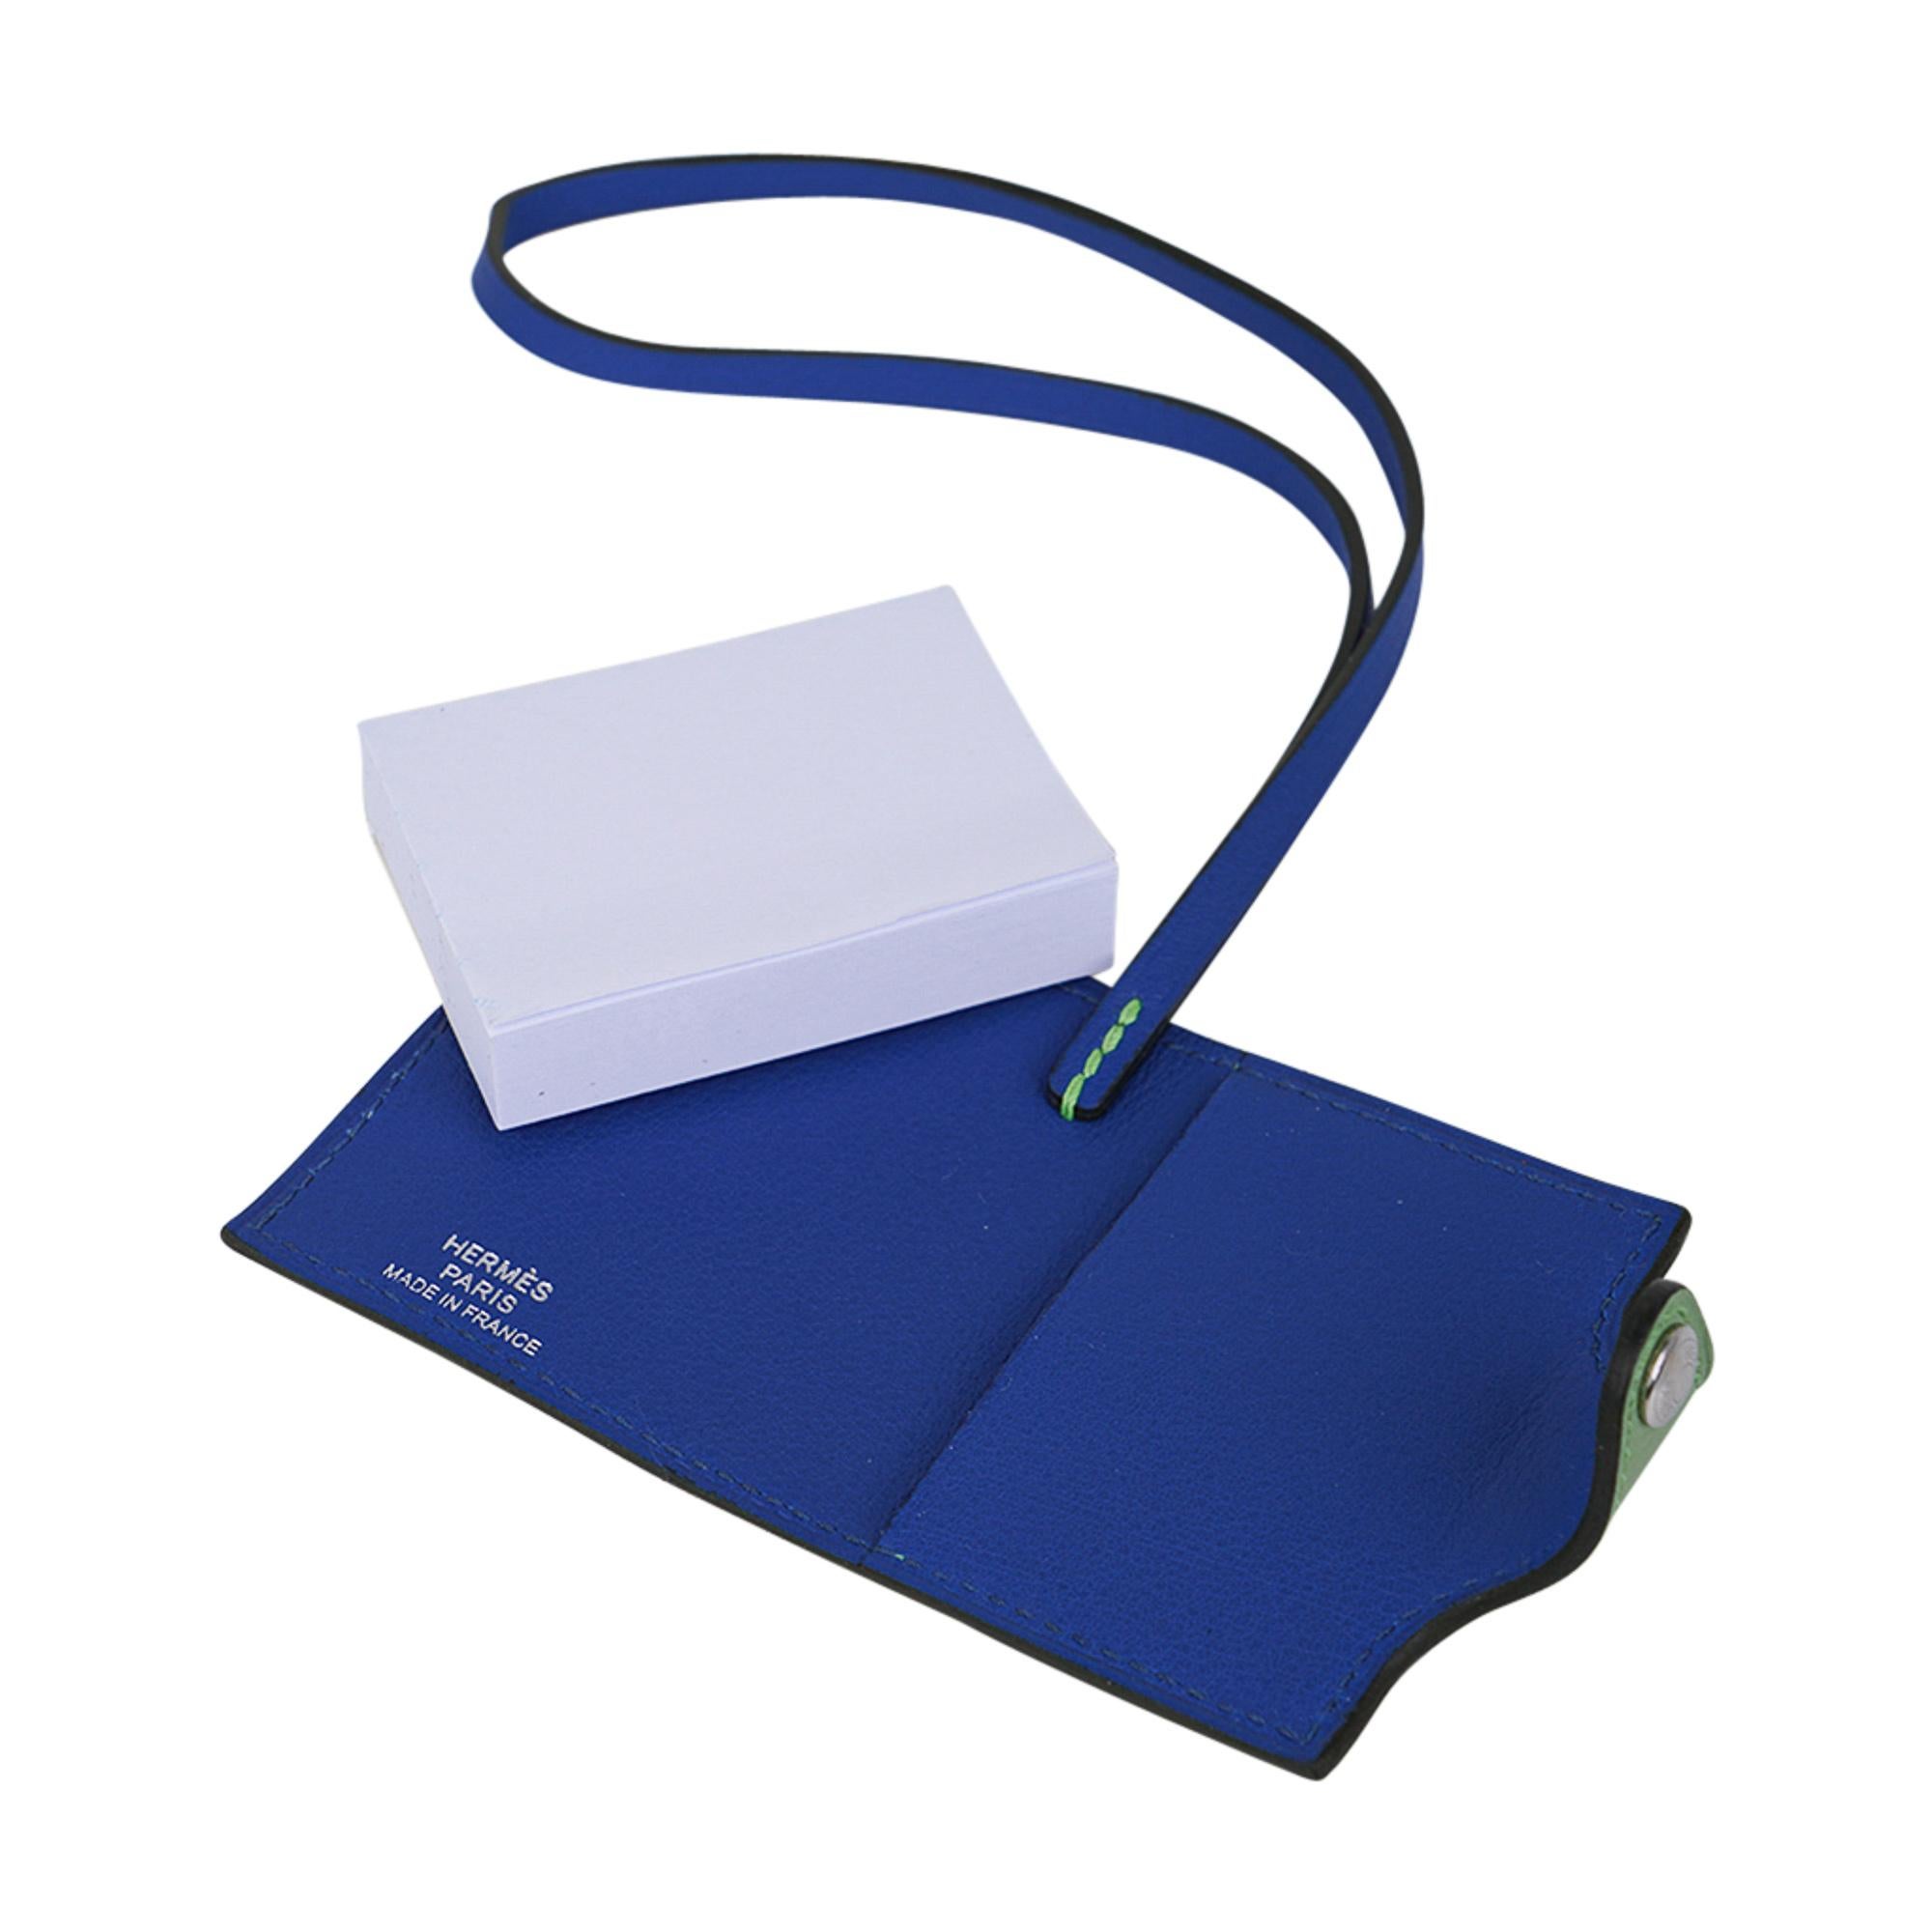 Mightychic offers a rare Hermes Ulysse Nano bag charm featured in Vert Criquet Evercolor and Bleu de France Swift.
Bi-Color verso Notebook with refillable note paper.
Palladium plated hardware.
Charming and playful she easily adorns a myriad bag